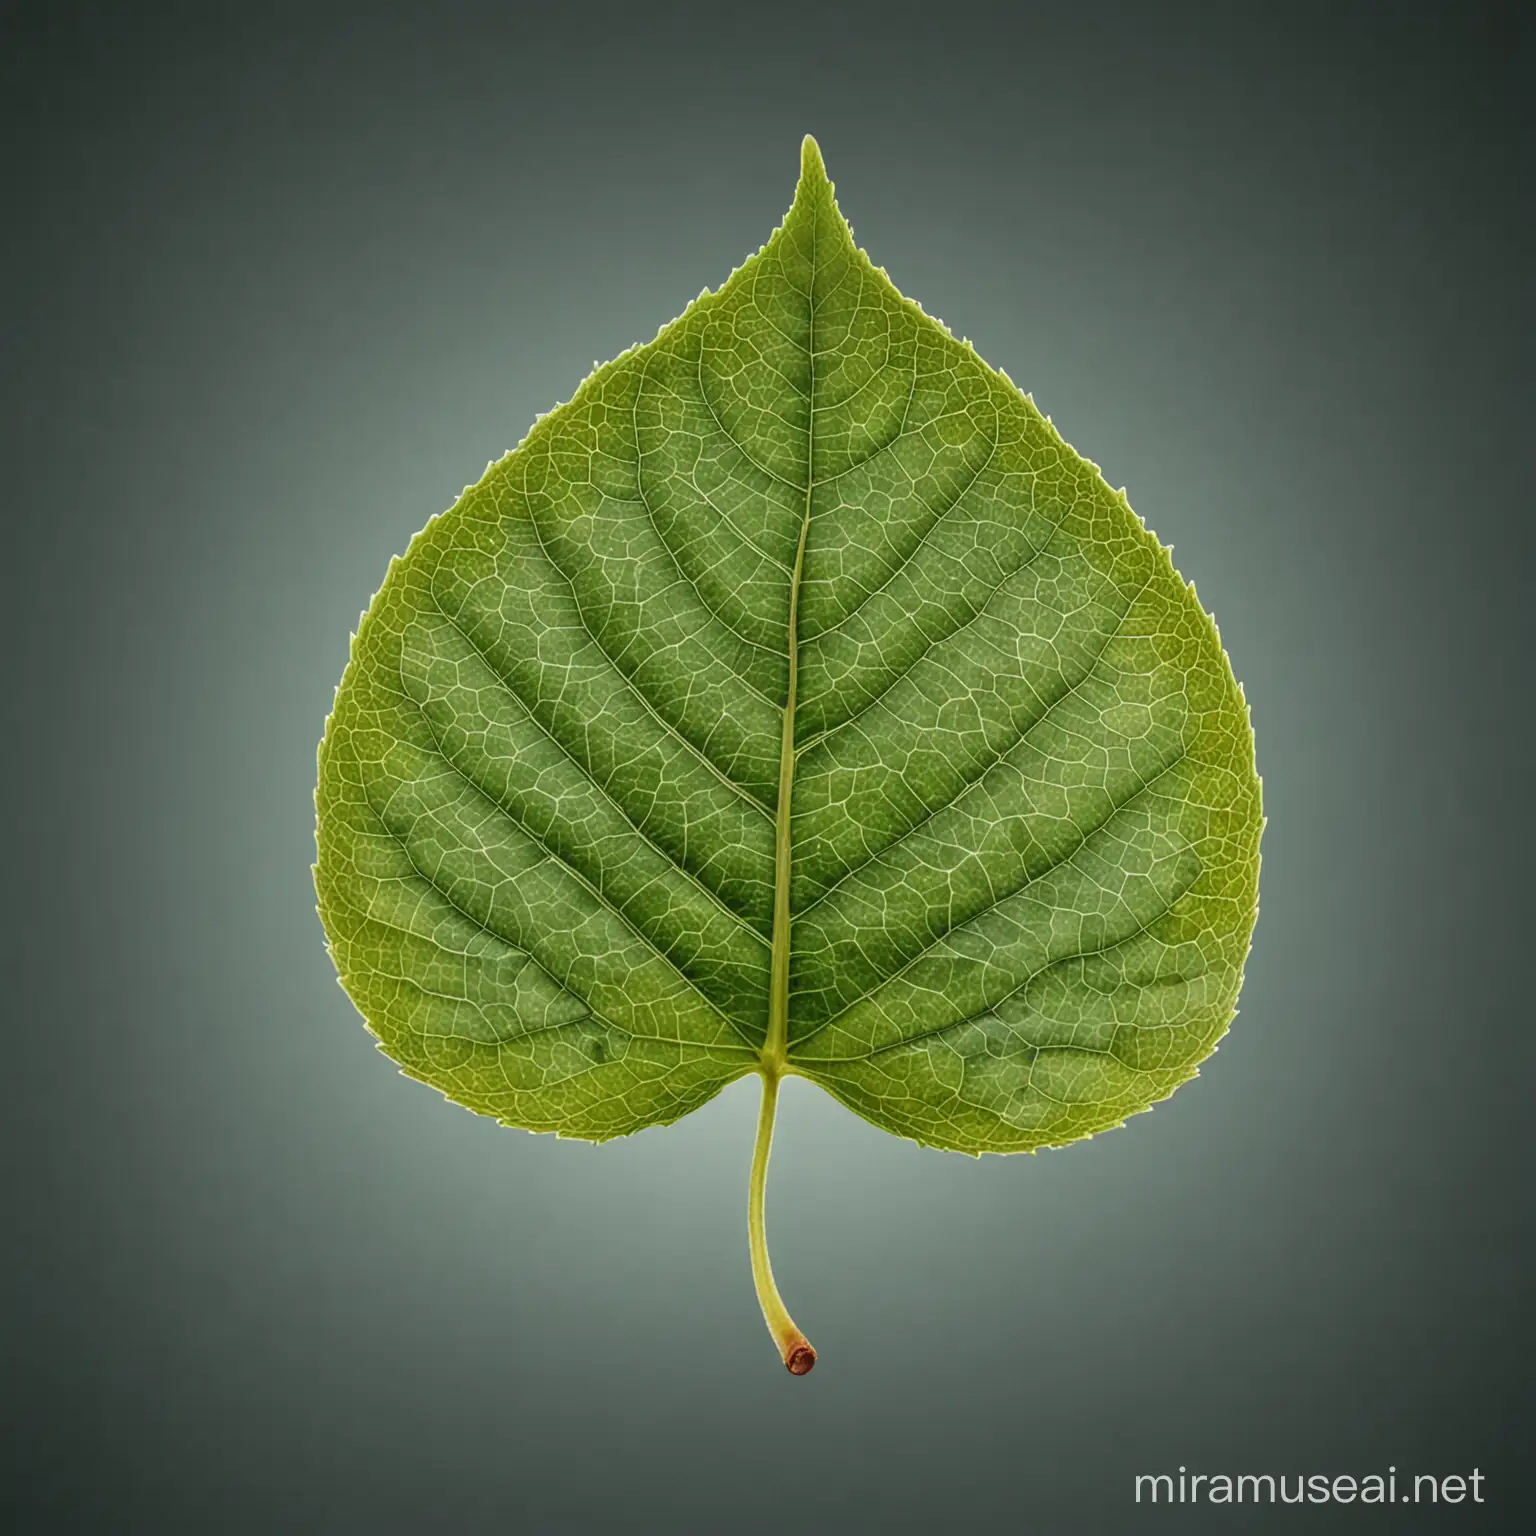 The Image Shows side view of one fresh leaf. The leaf is set against an isolated background. It is the perfect leaf with a symmetrical, geometric and beautiful shape.